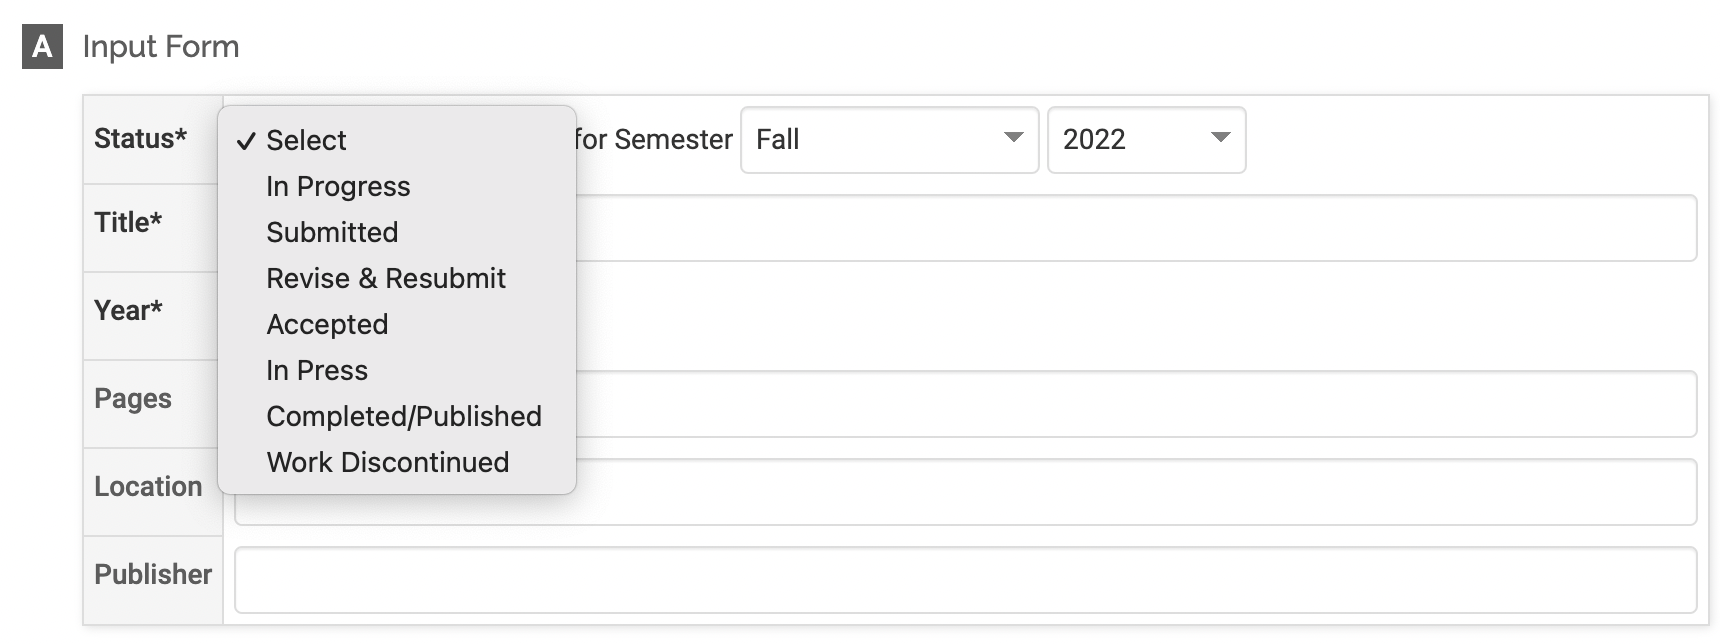 Input Form section with the dropdown next to Status revealed. The dropdown includes Select, In Progress, Submitted, Revise & Resubmit, Accepted, In Press, Completed/Published and Work Discontinued